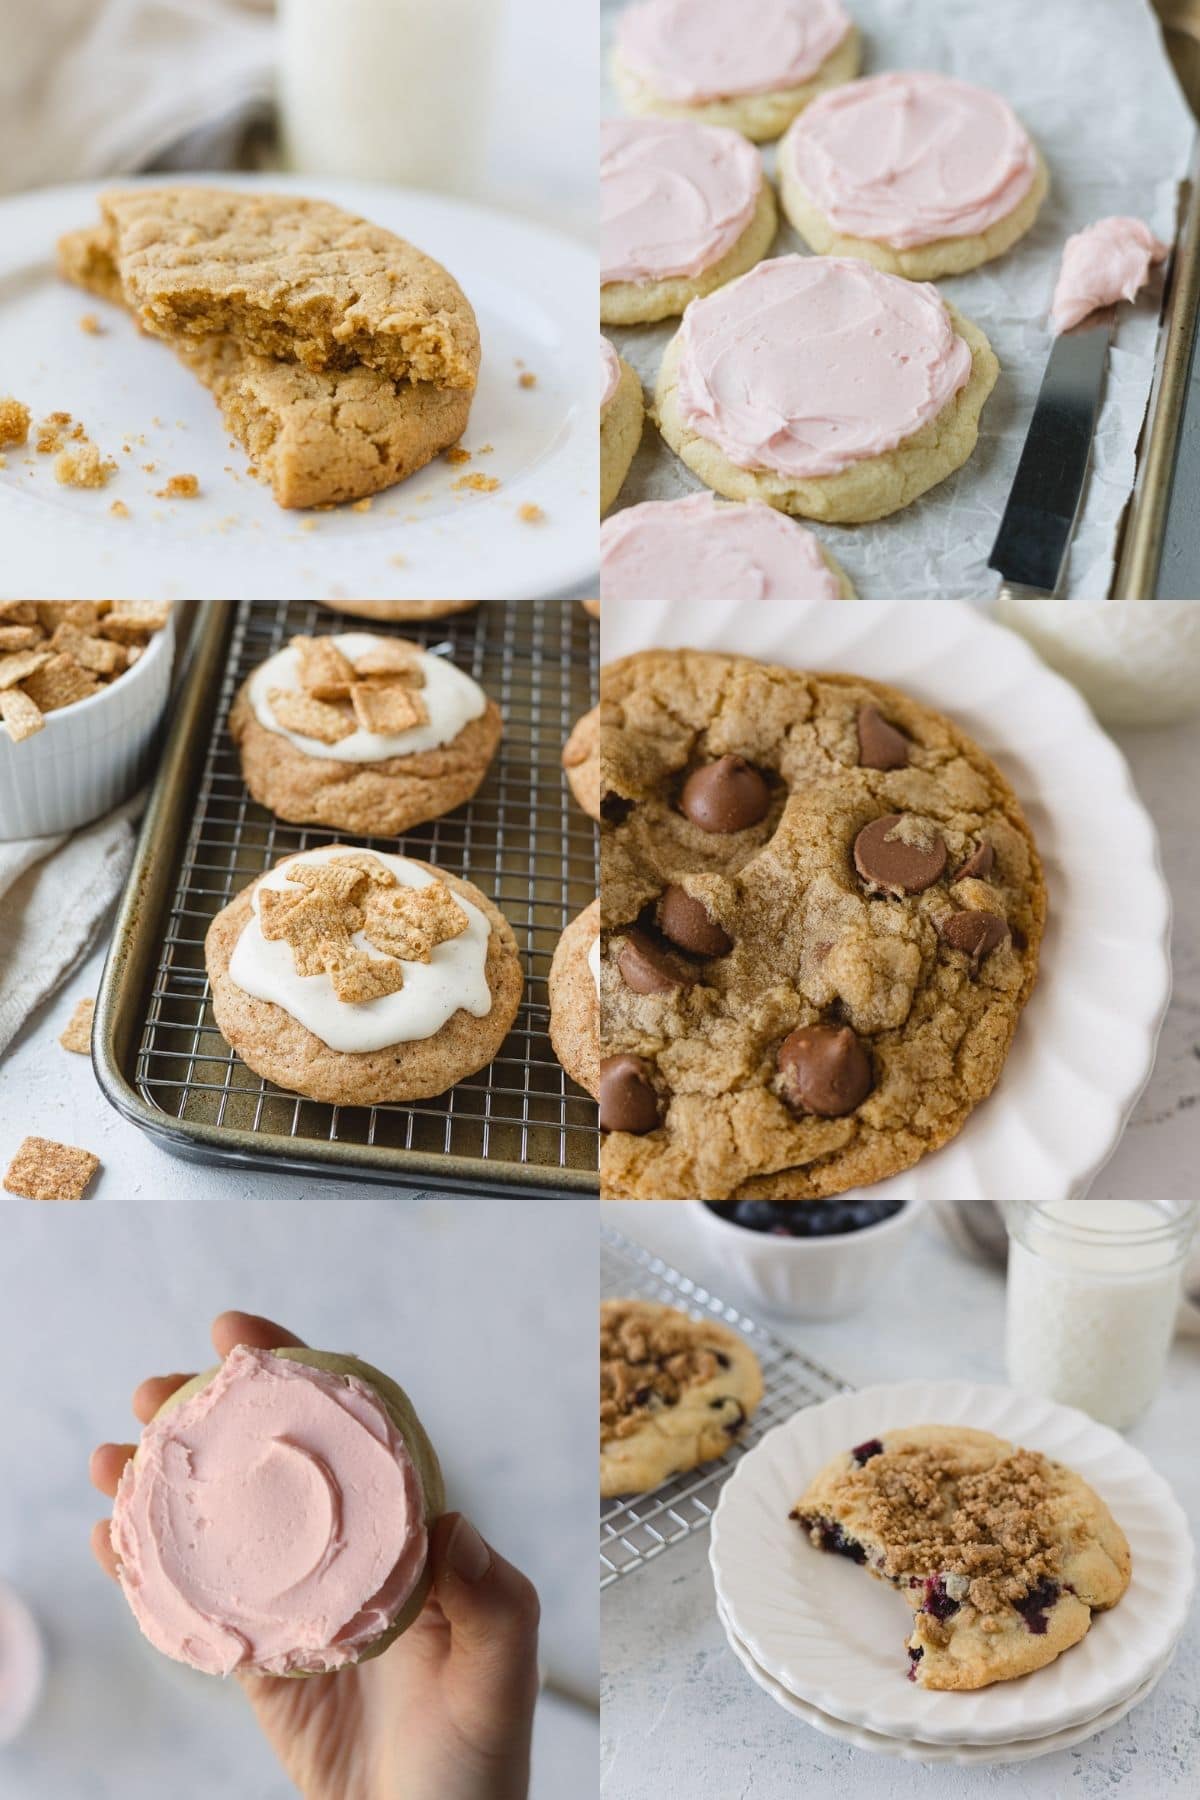 Six cookie photos including a chocolate chip cookie, pink frosted sugar cookie, cinnamon cookies, and more.